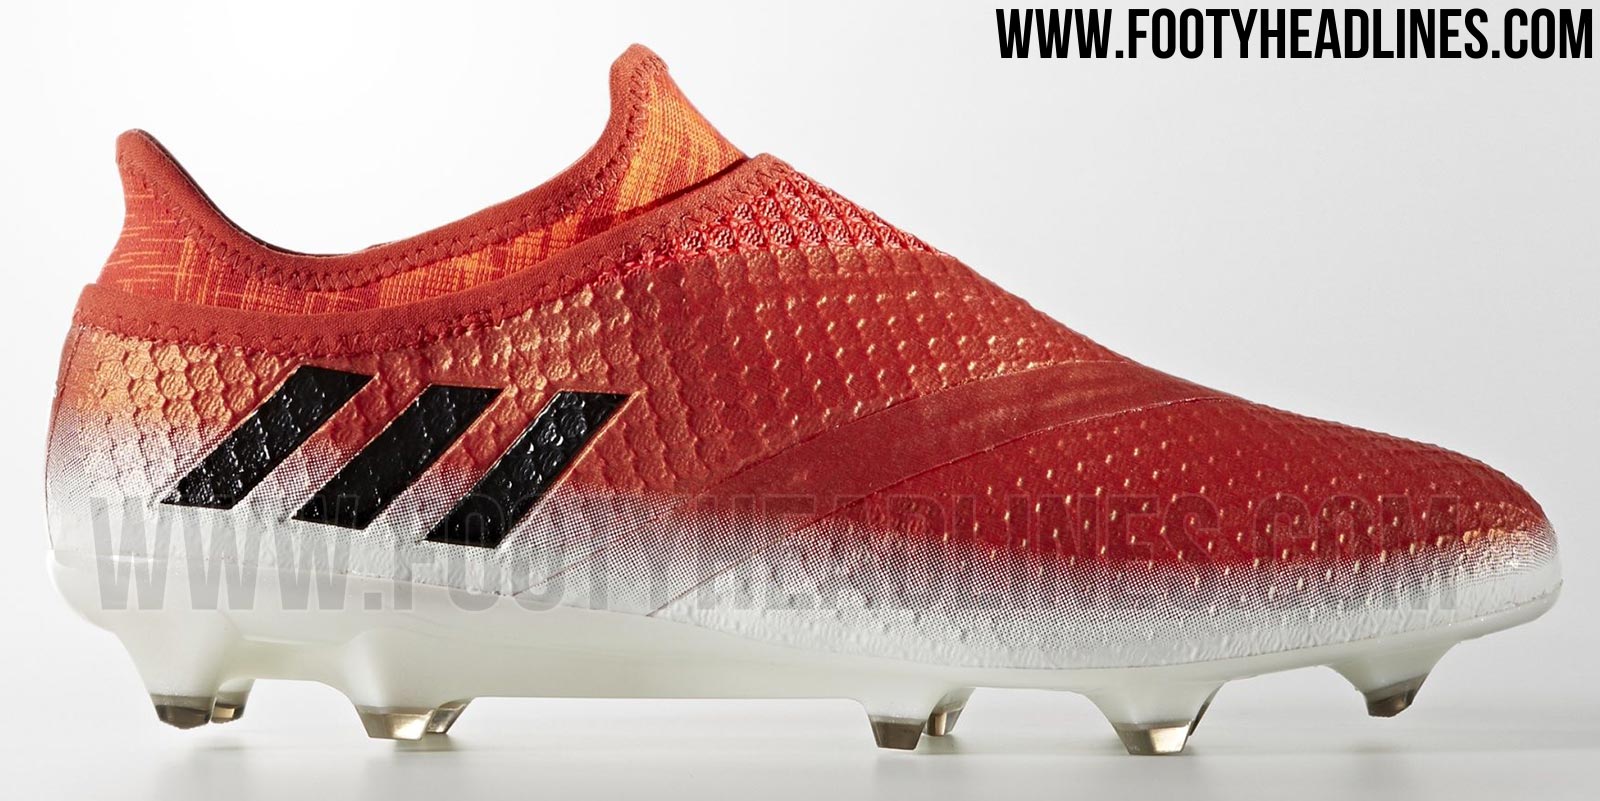 Full Adidas Red Limit Pack - Footy Headlines